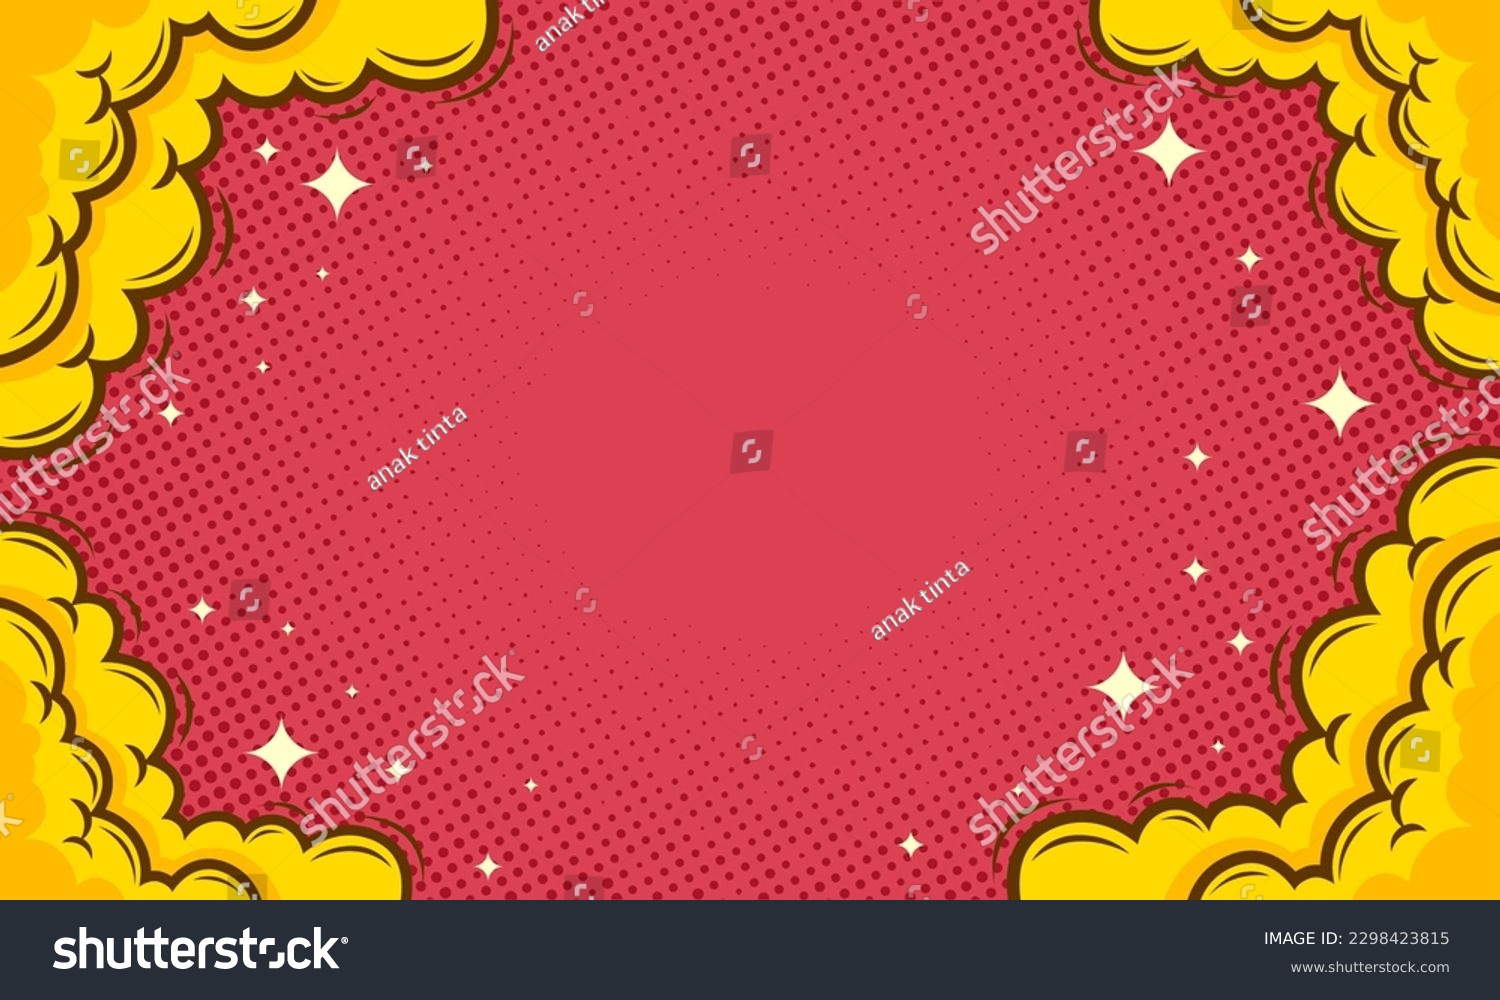 Blank comic cartoon pop art background with cloud and star illustration #2298423815